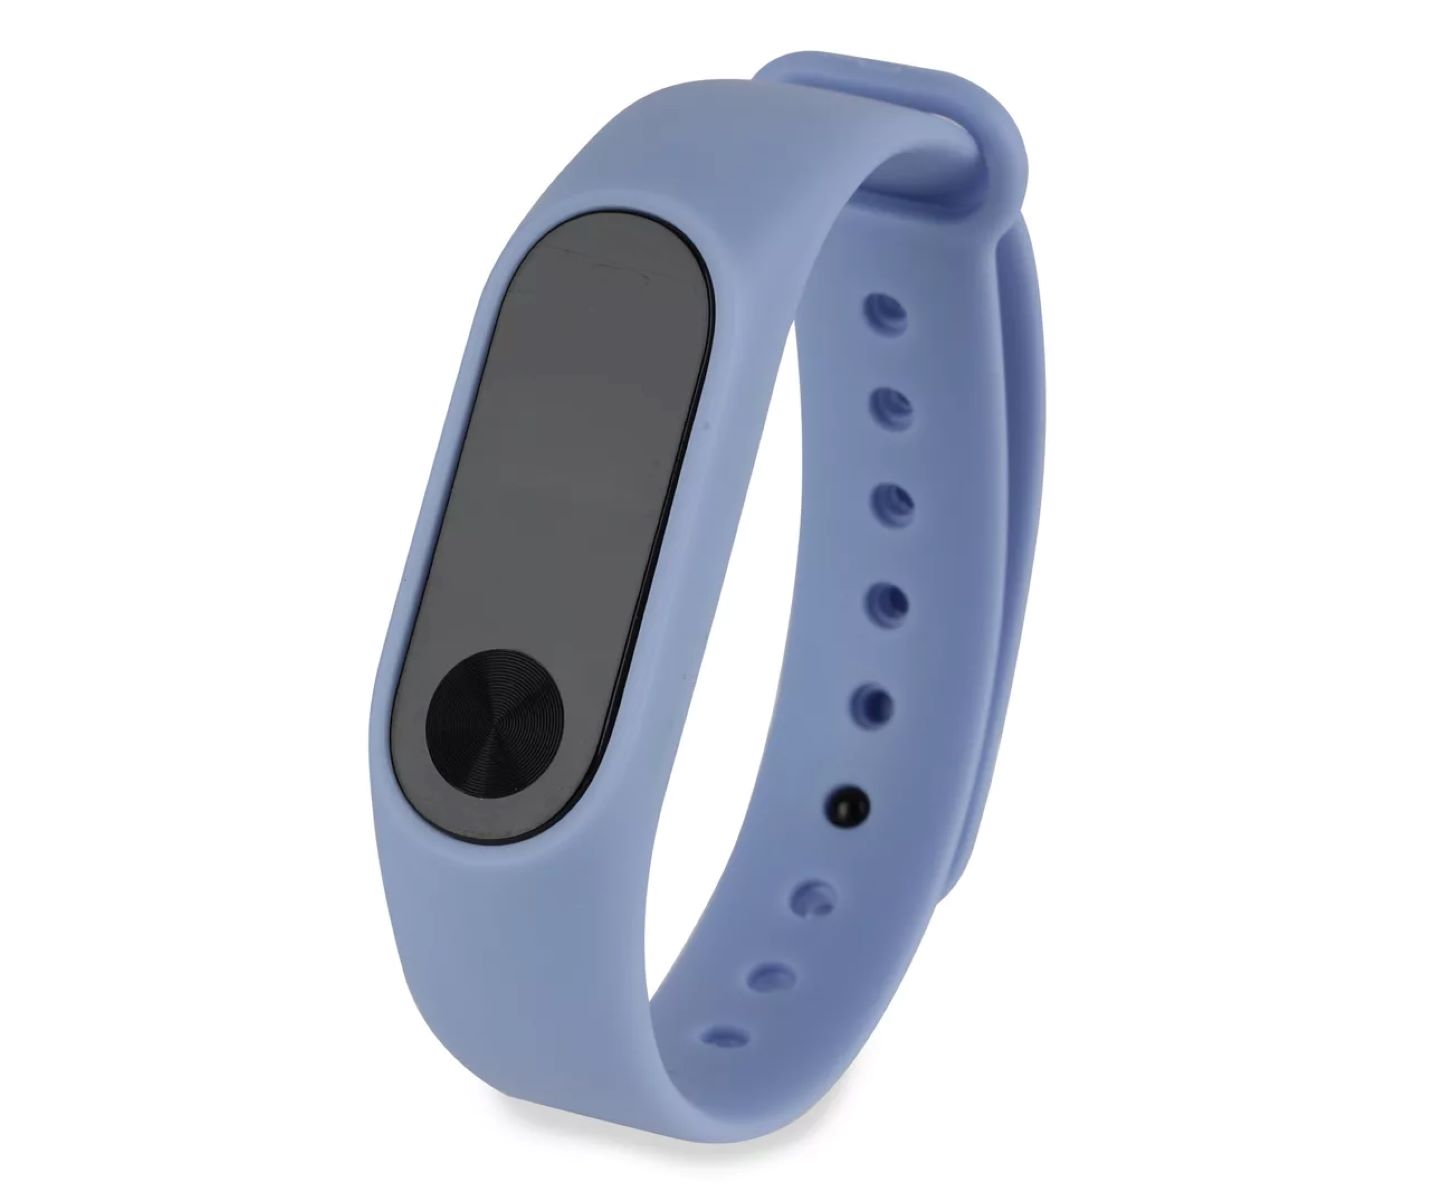 How To Use The Vivitar Fitness Tracker